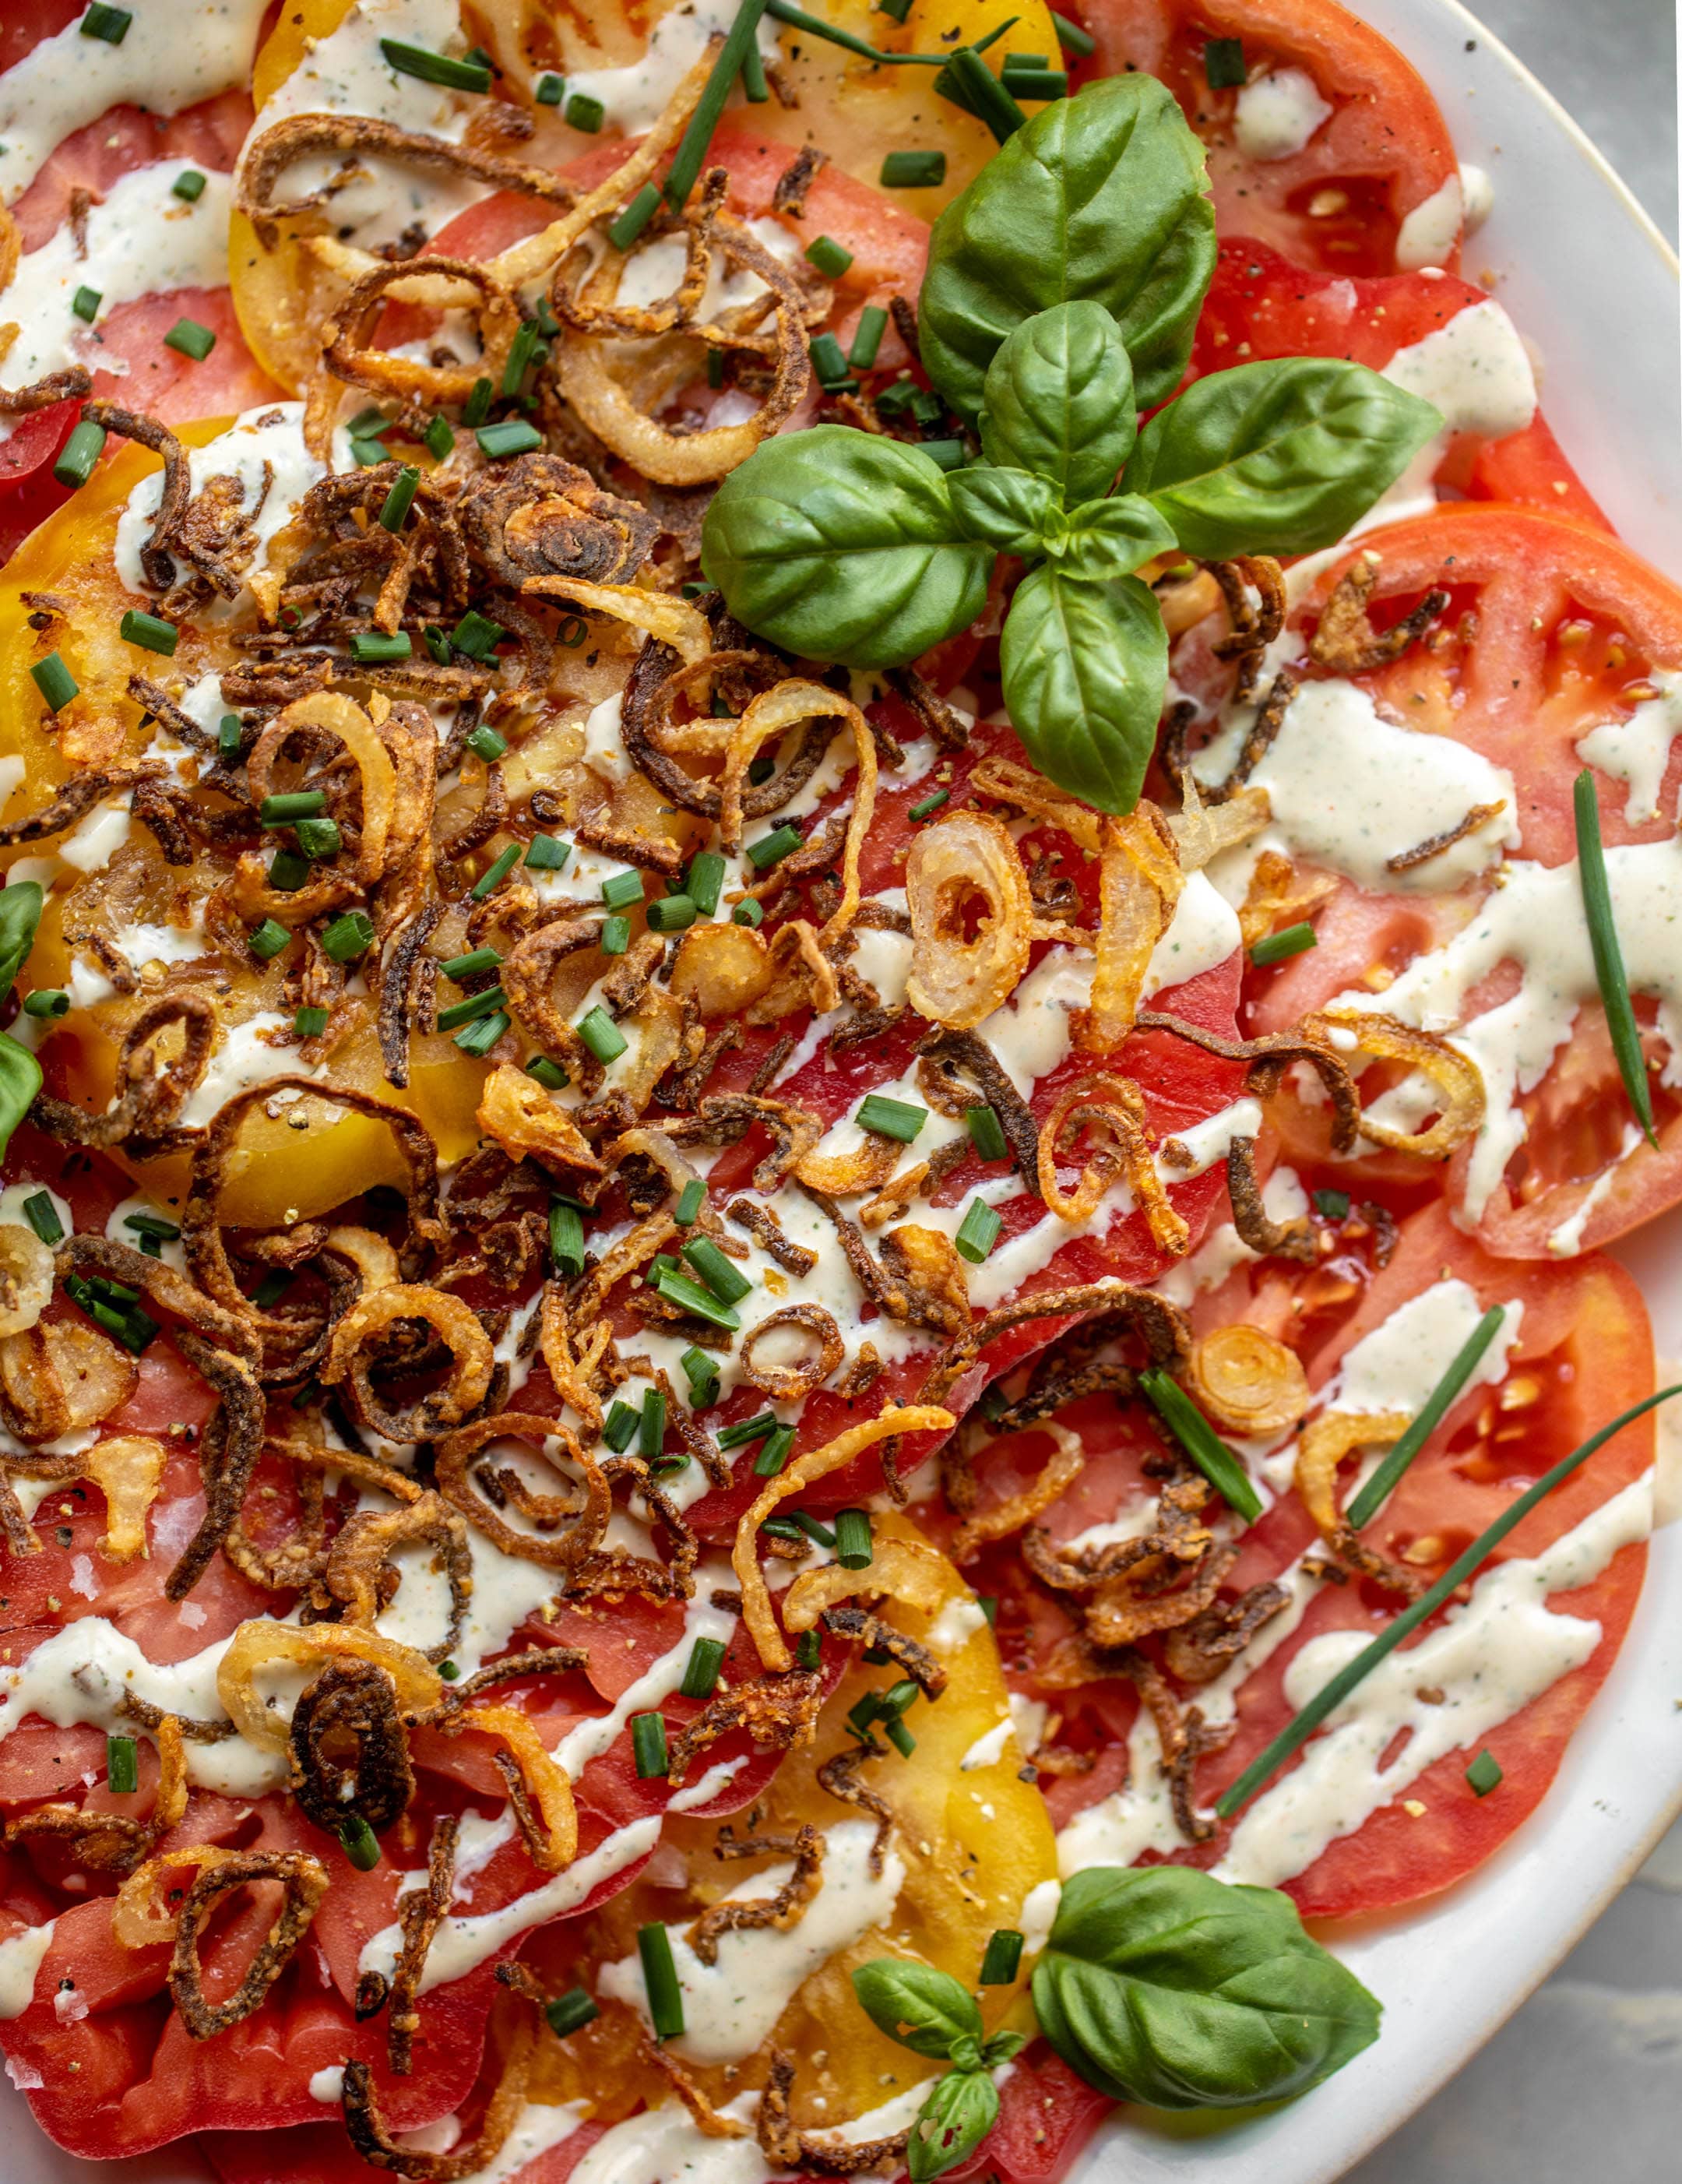 heirloom tomato salad with buttermilk ranch and crispy shallots